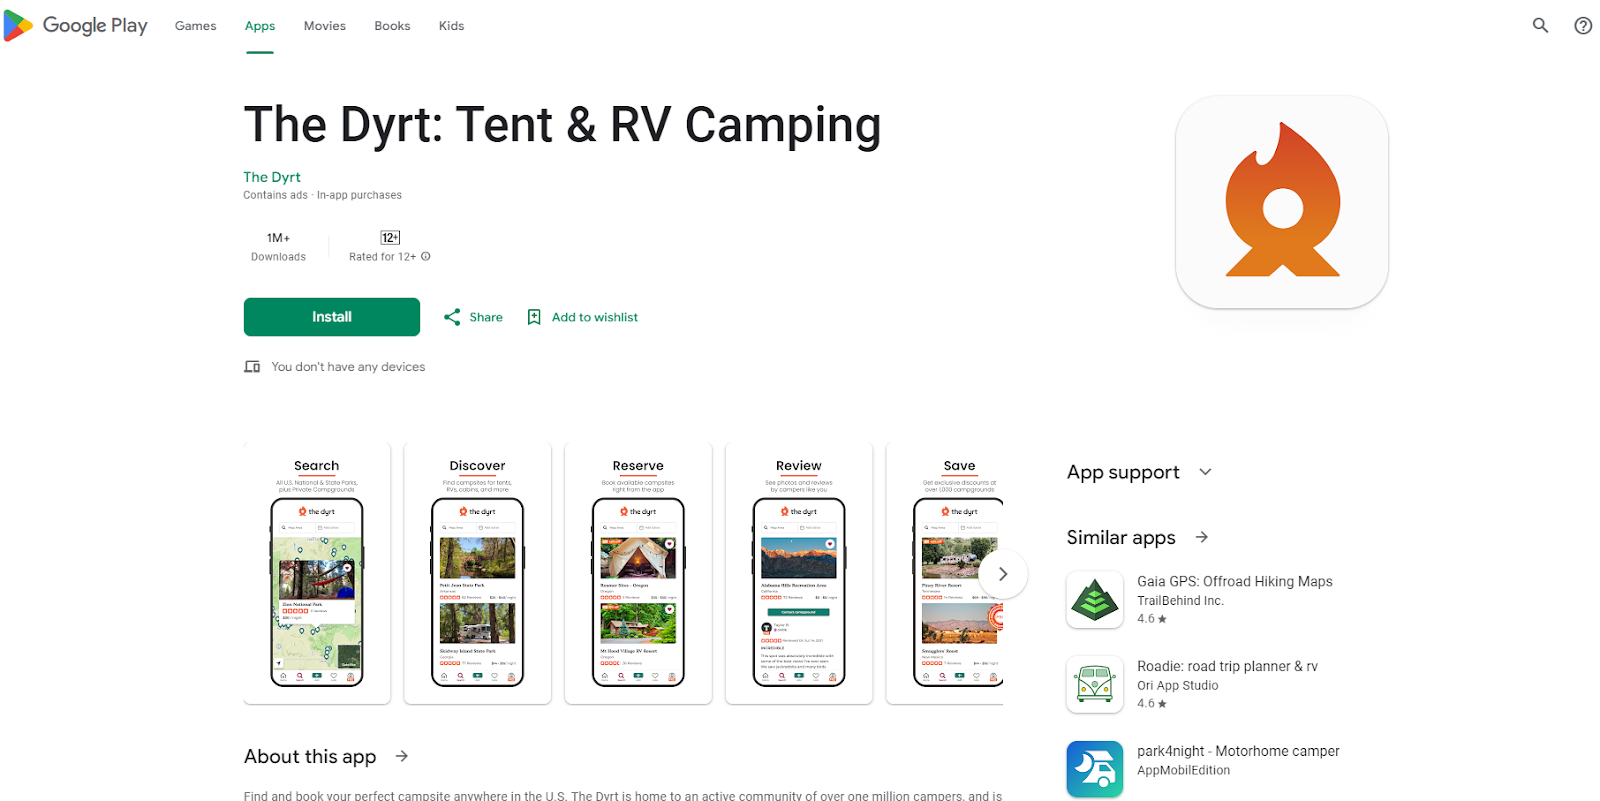 How to Download The: Tent & RV Camping